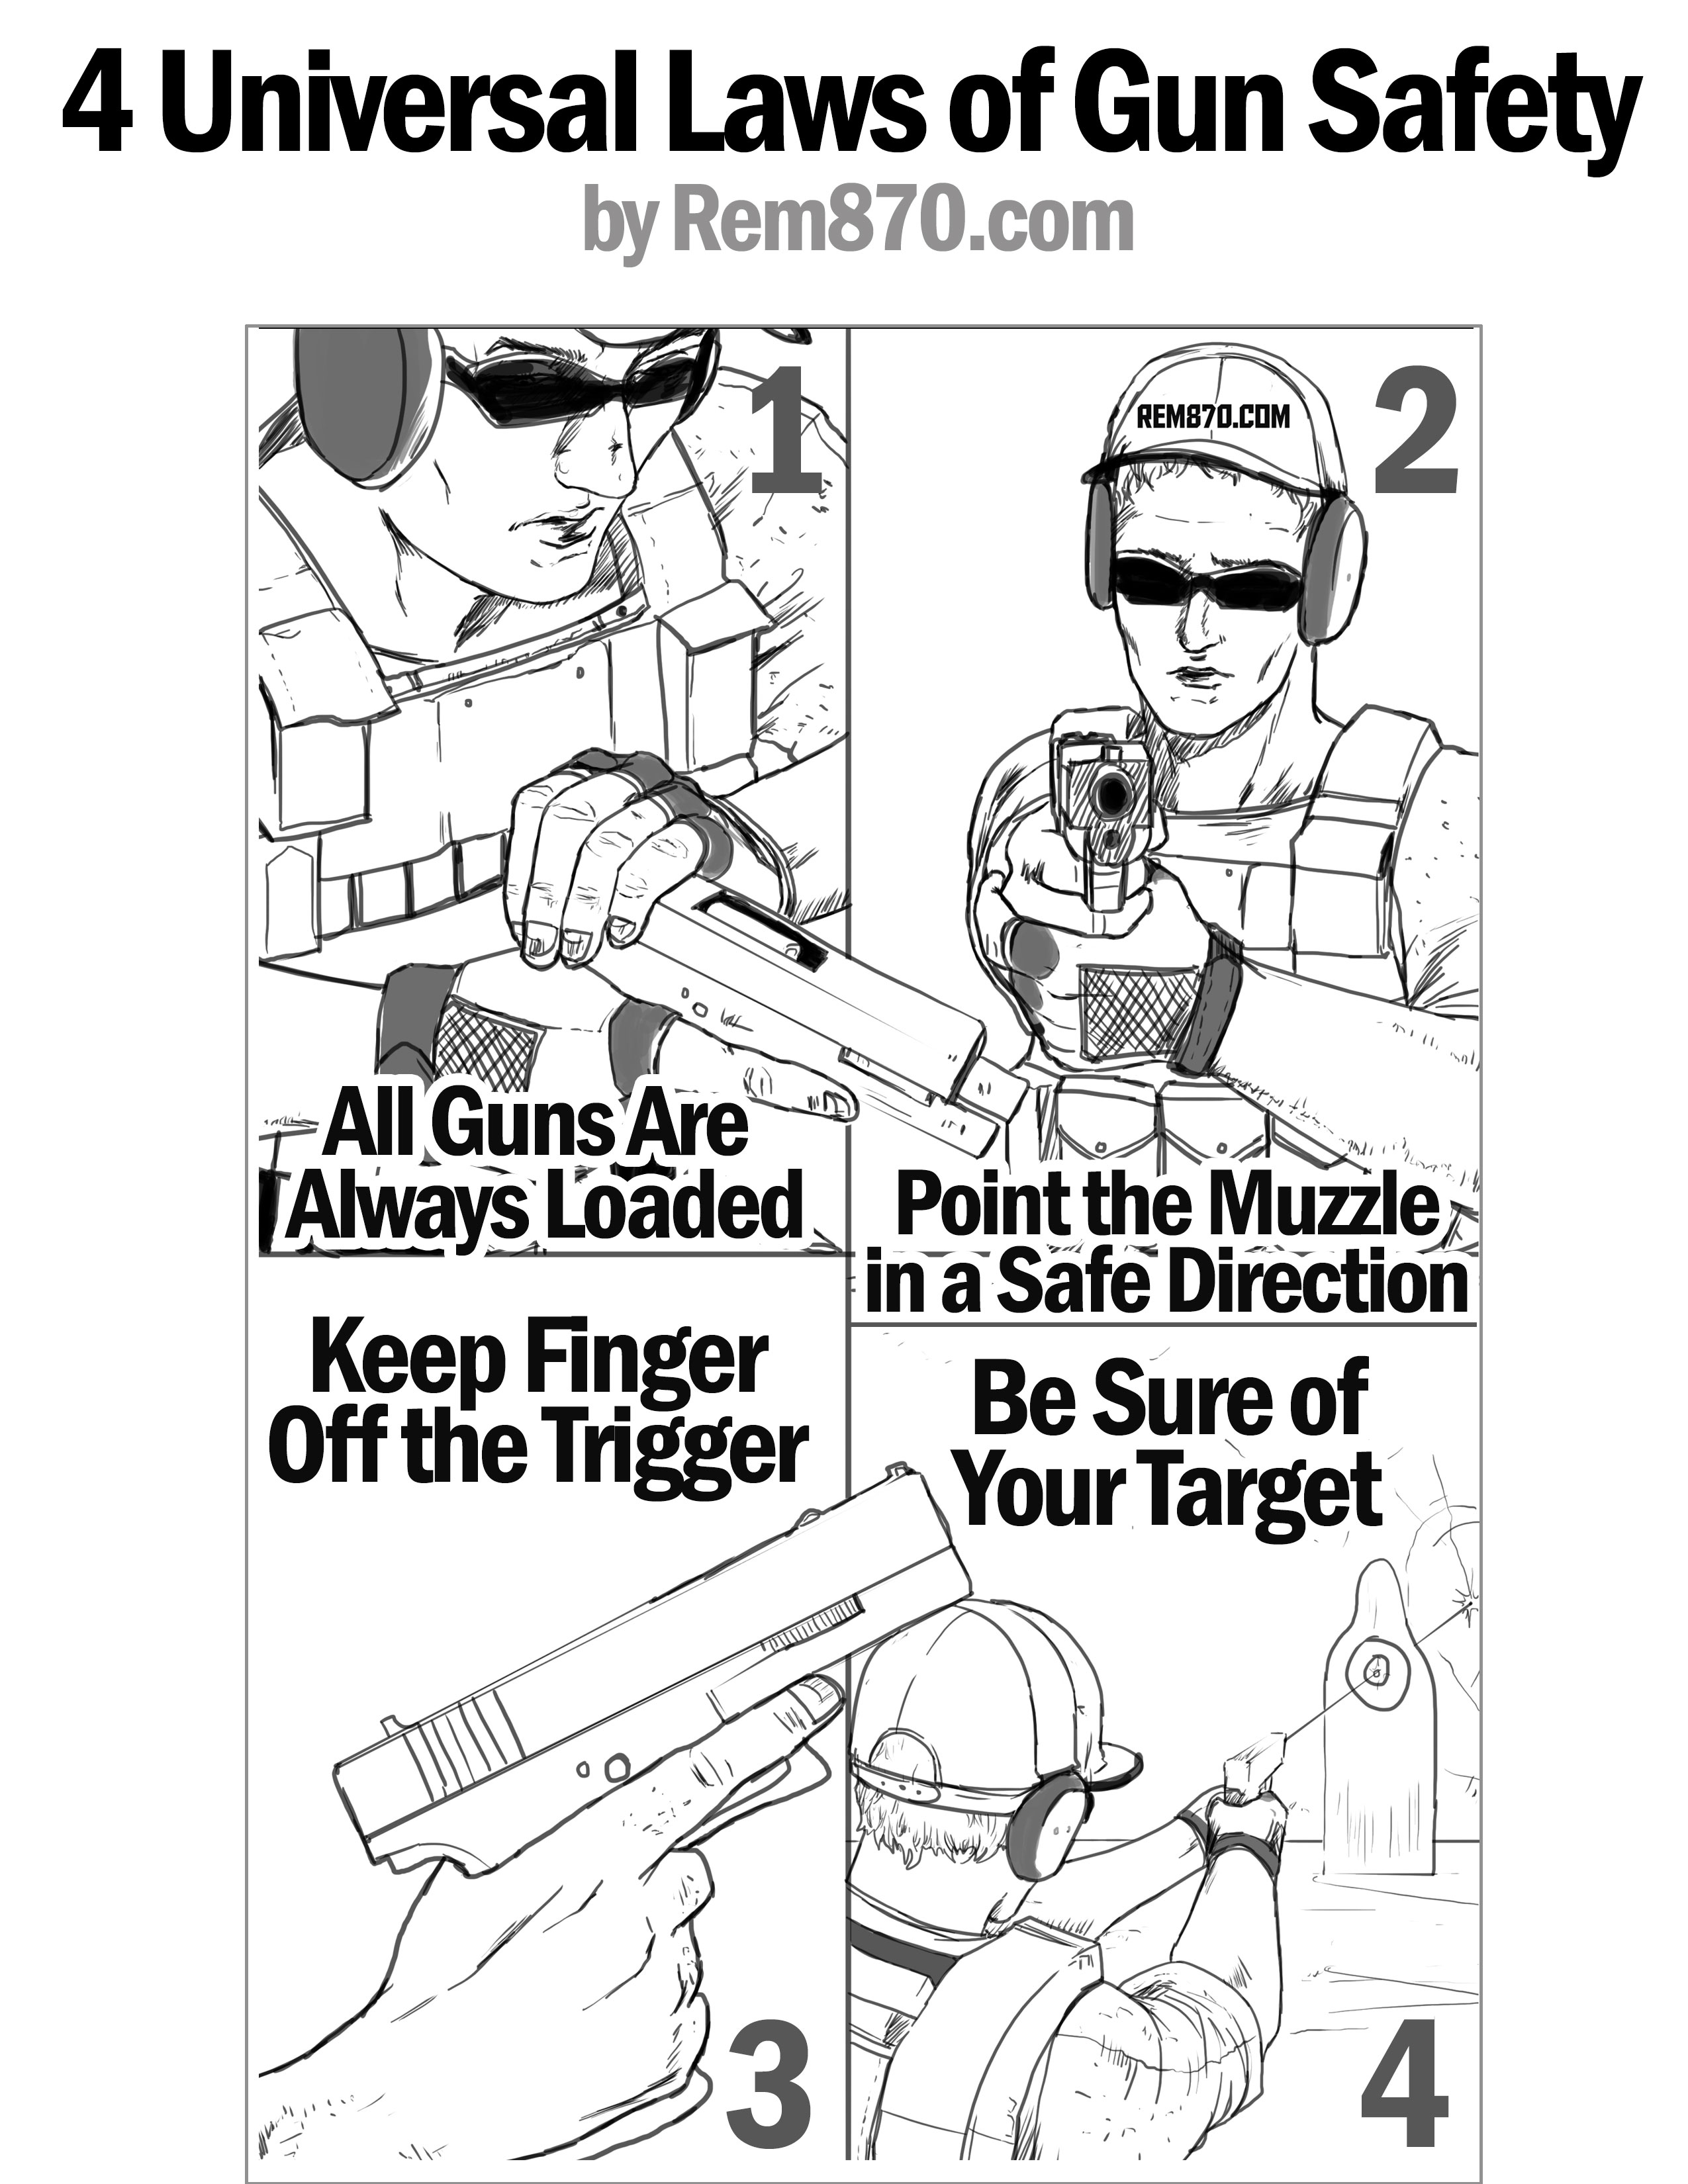 FREE Printable Gun Safety Poster (4 Universal Safety Rules)